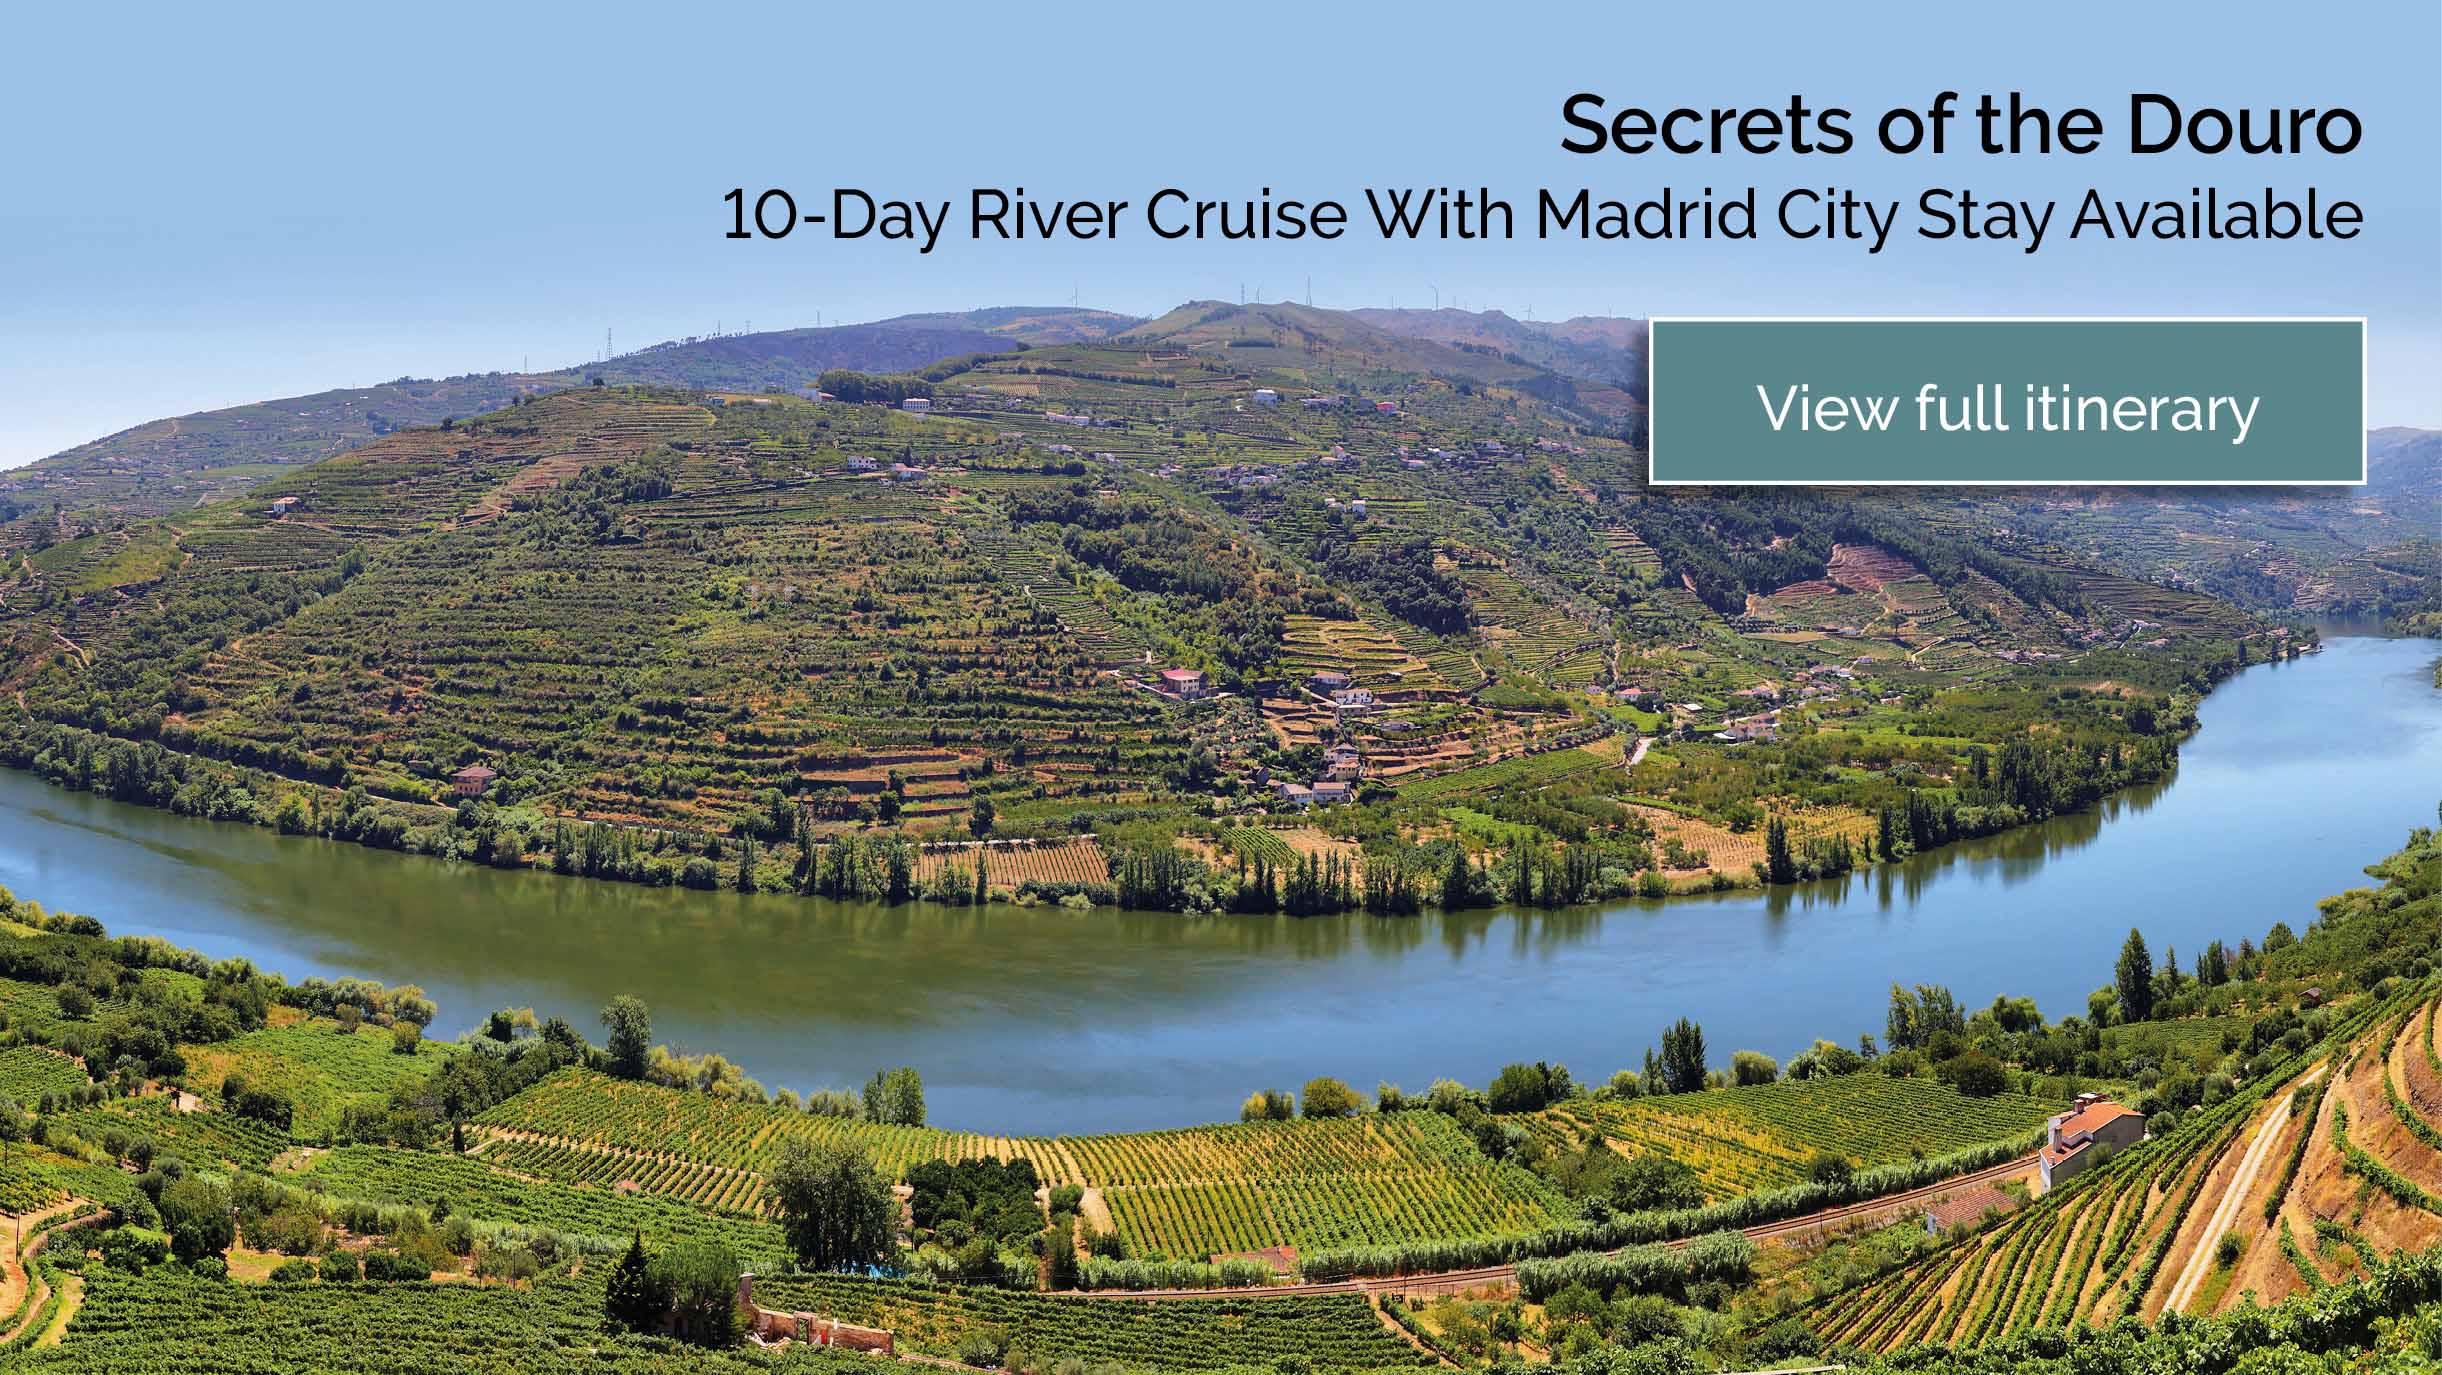 view the full 10-day Secrets of the Douro with Madrid Stay River Cruise itinerary here 